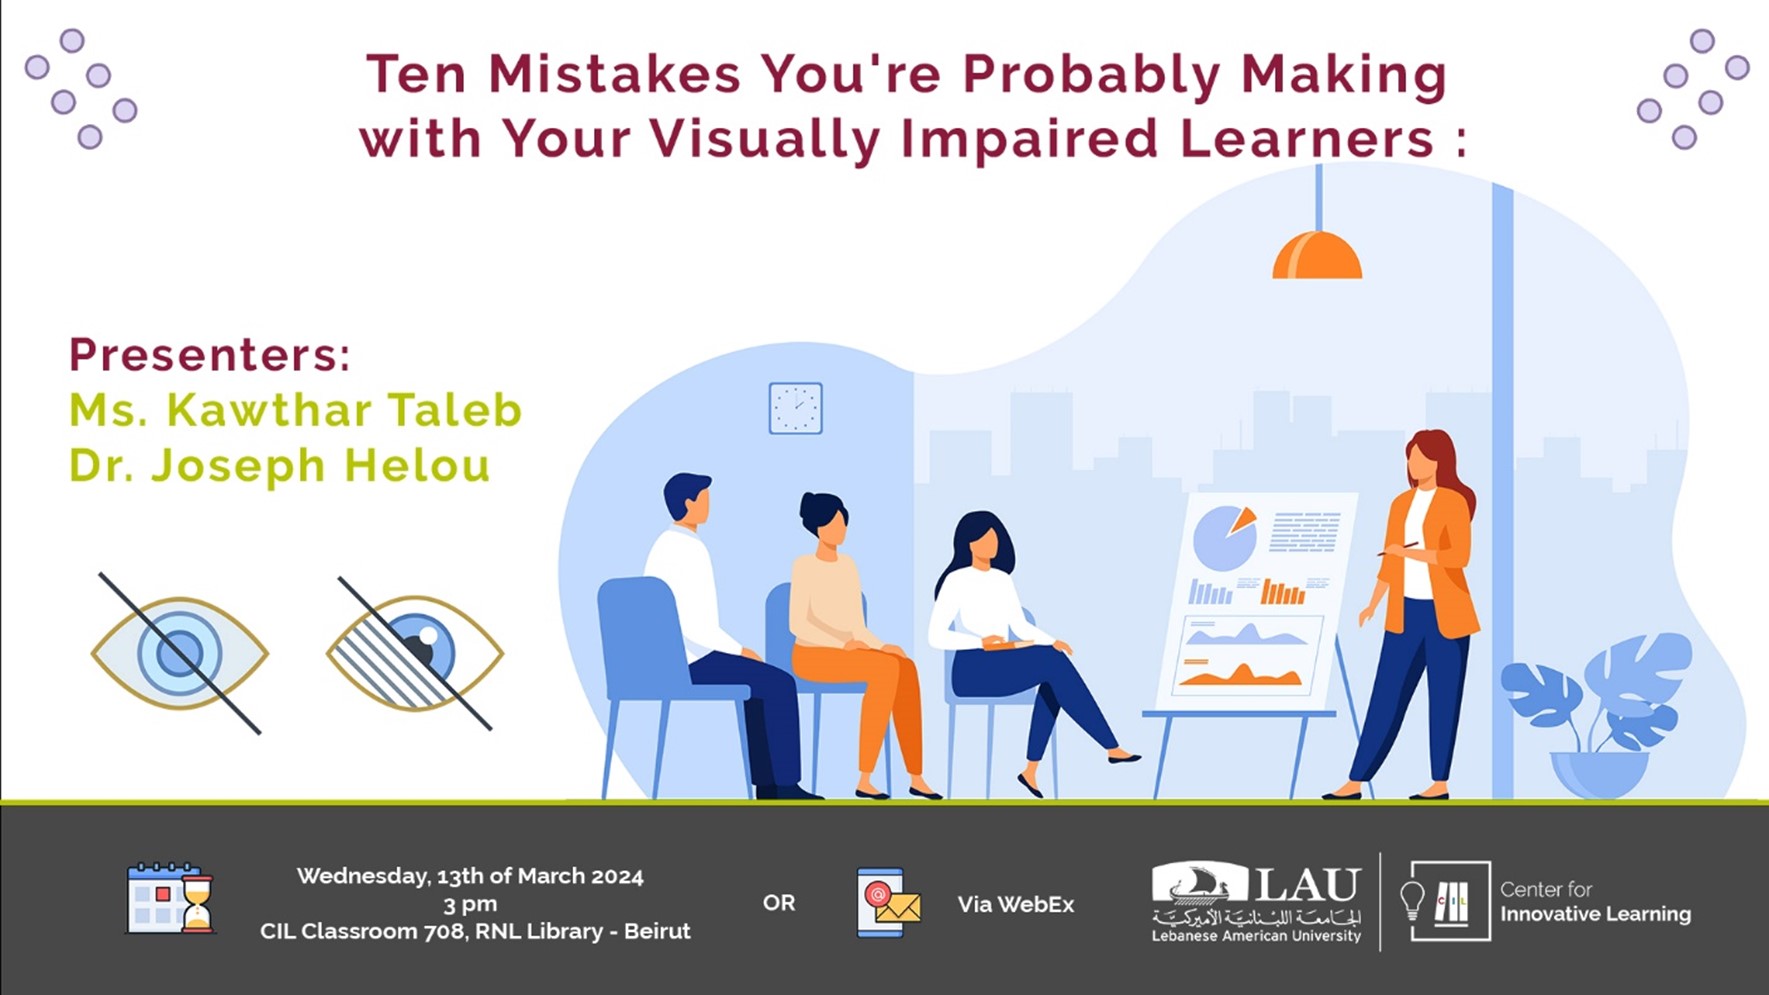 Ten Mistakes You're Probably Making with Your Visually Impaired Learners